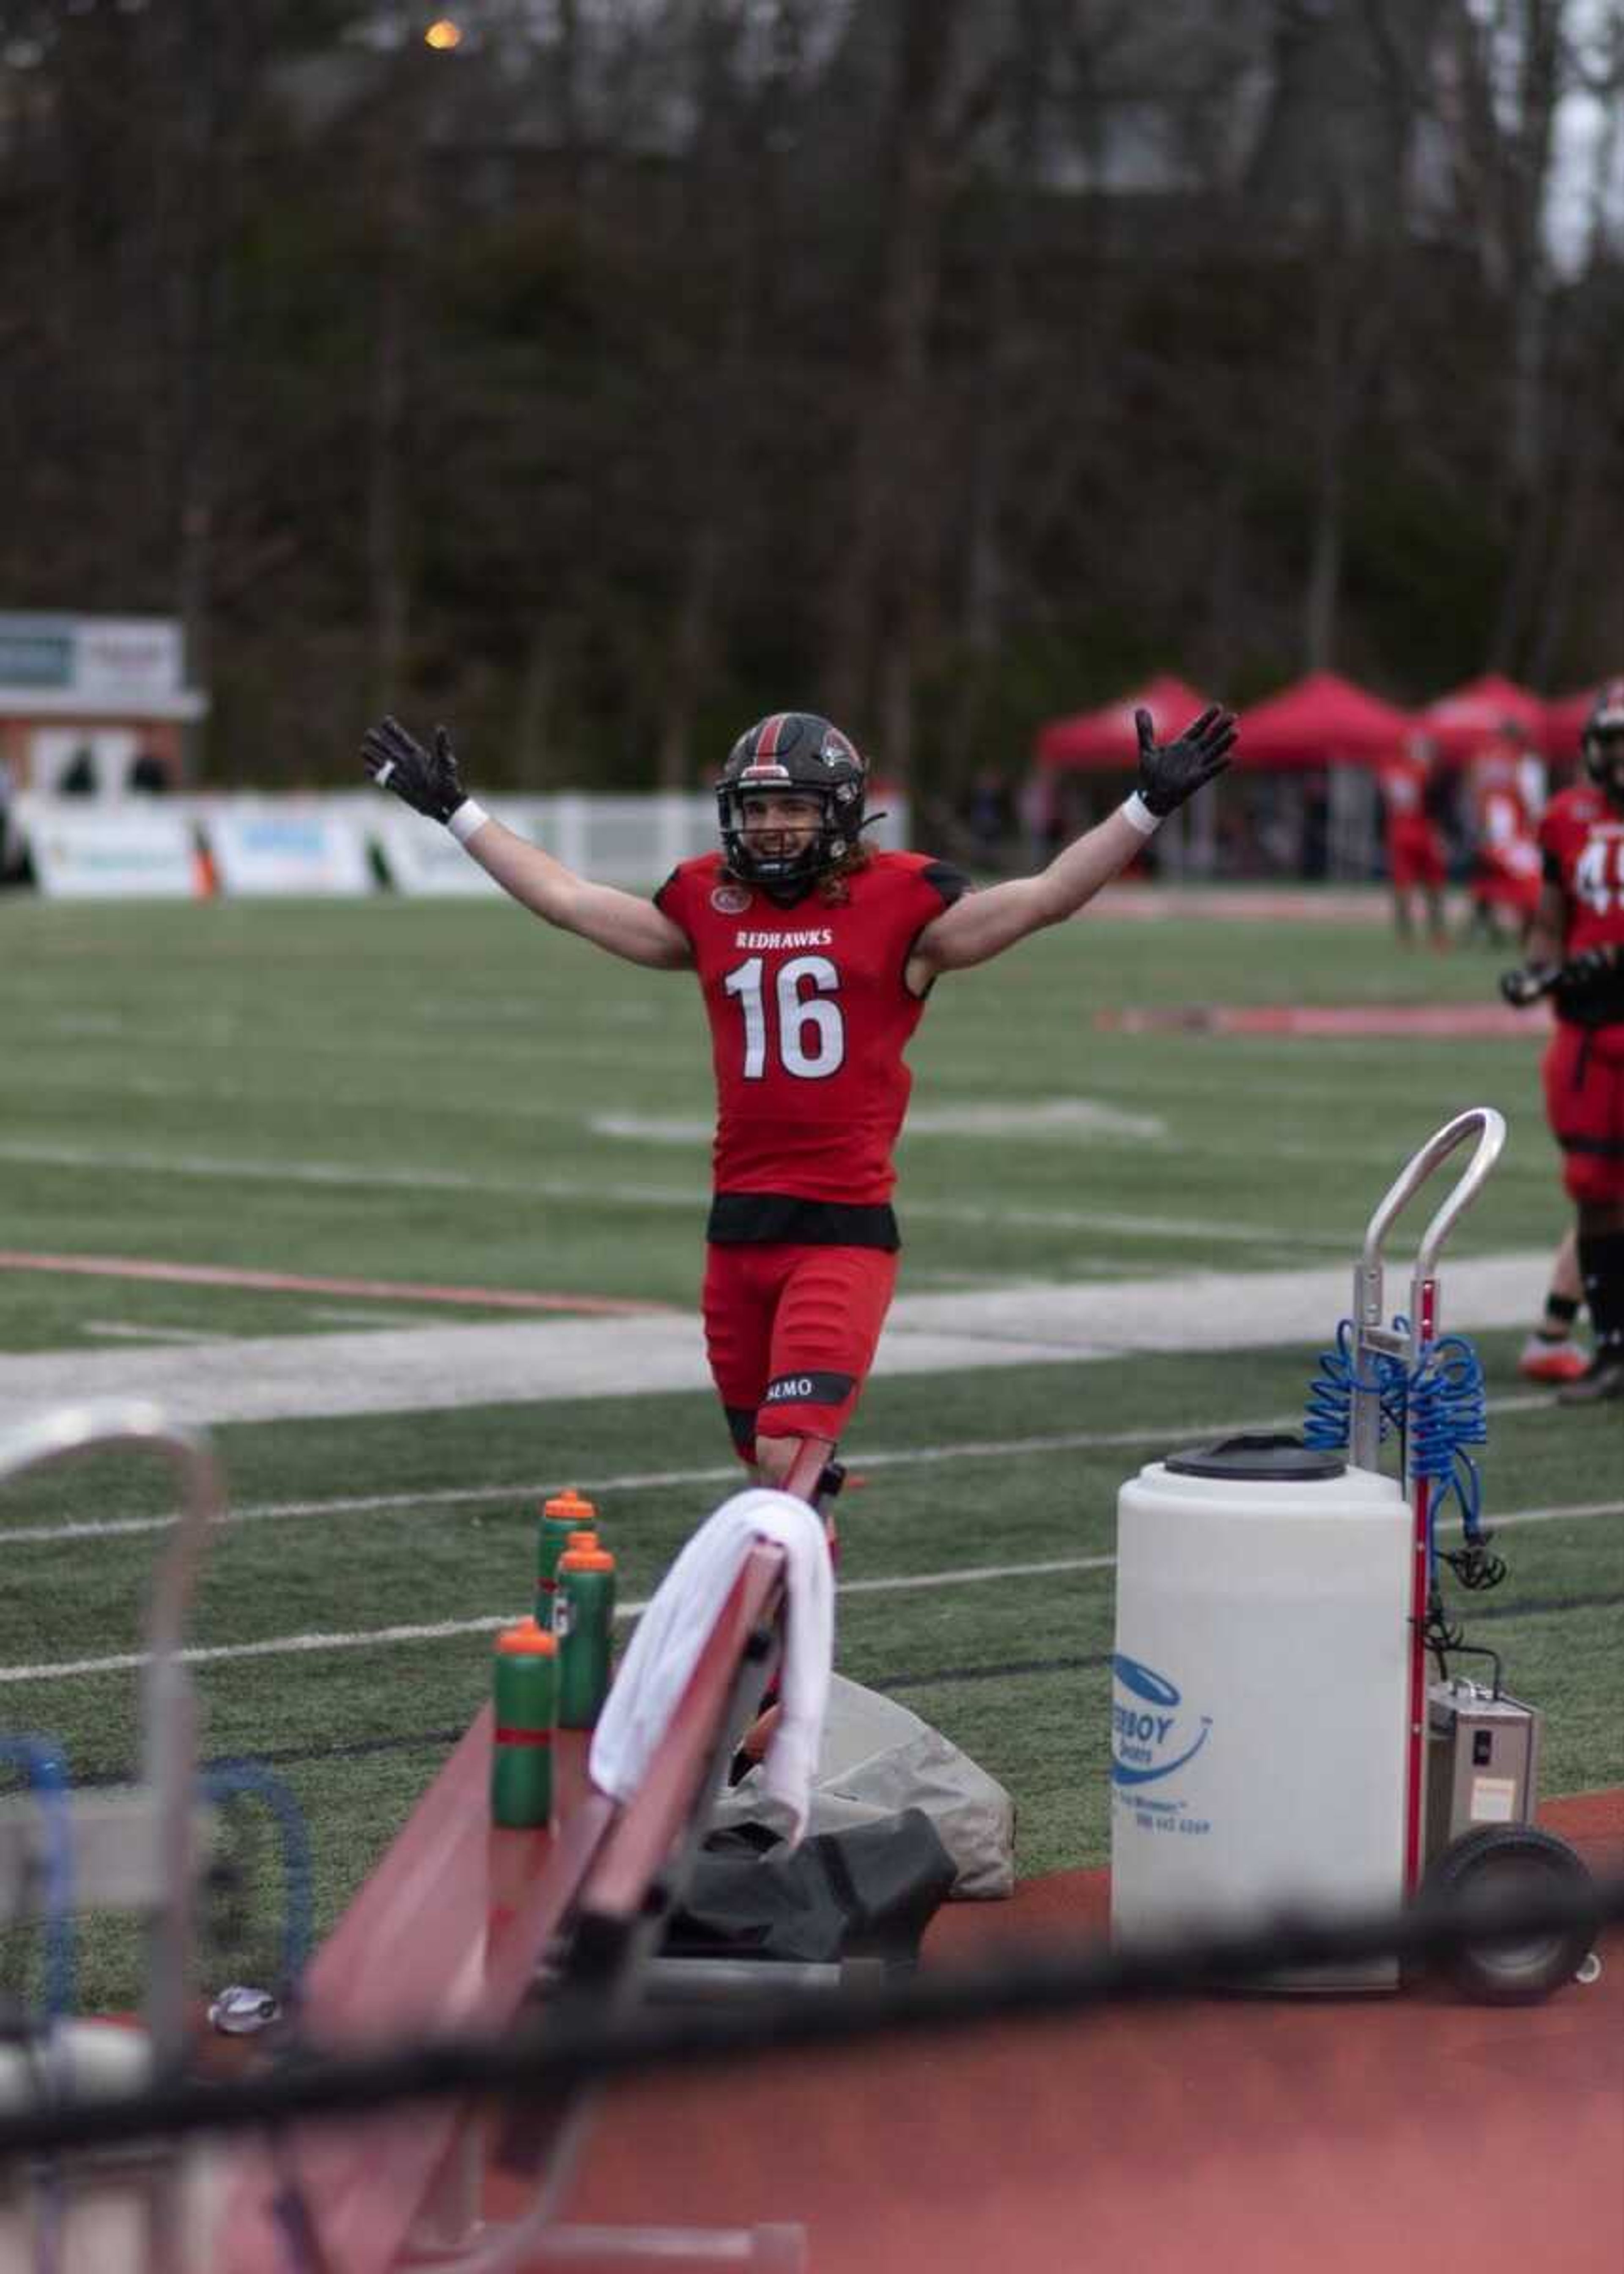 Colby Cornett (left) celebrates on the sideline after scoring a touchdown vs Austin Peay at Houck Field on March 14.